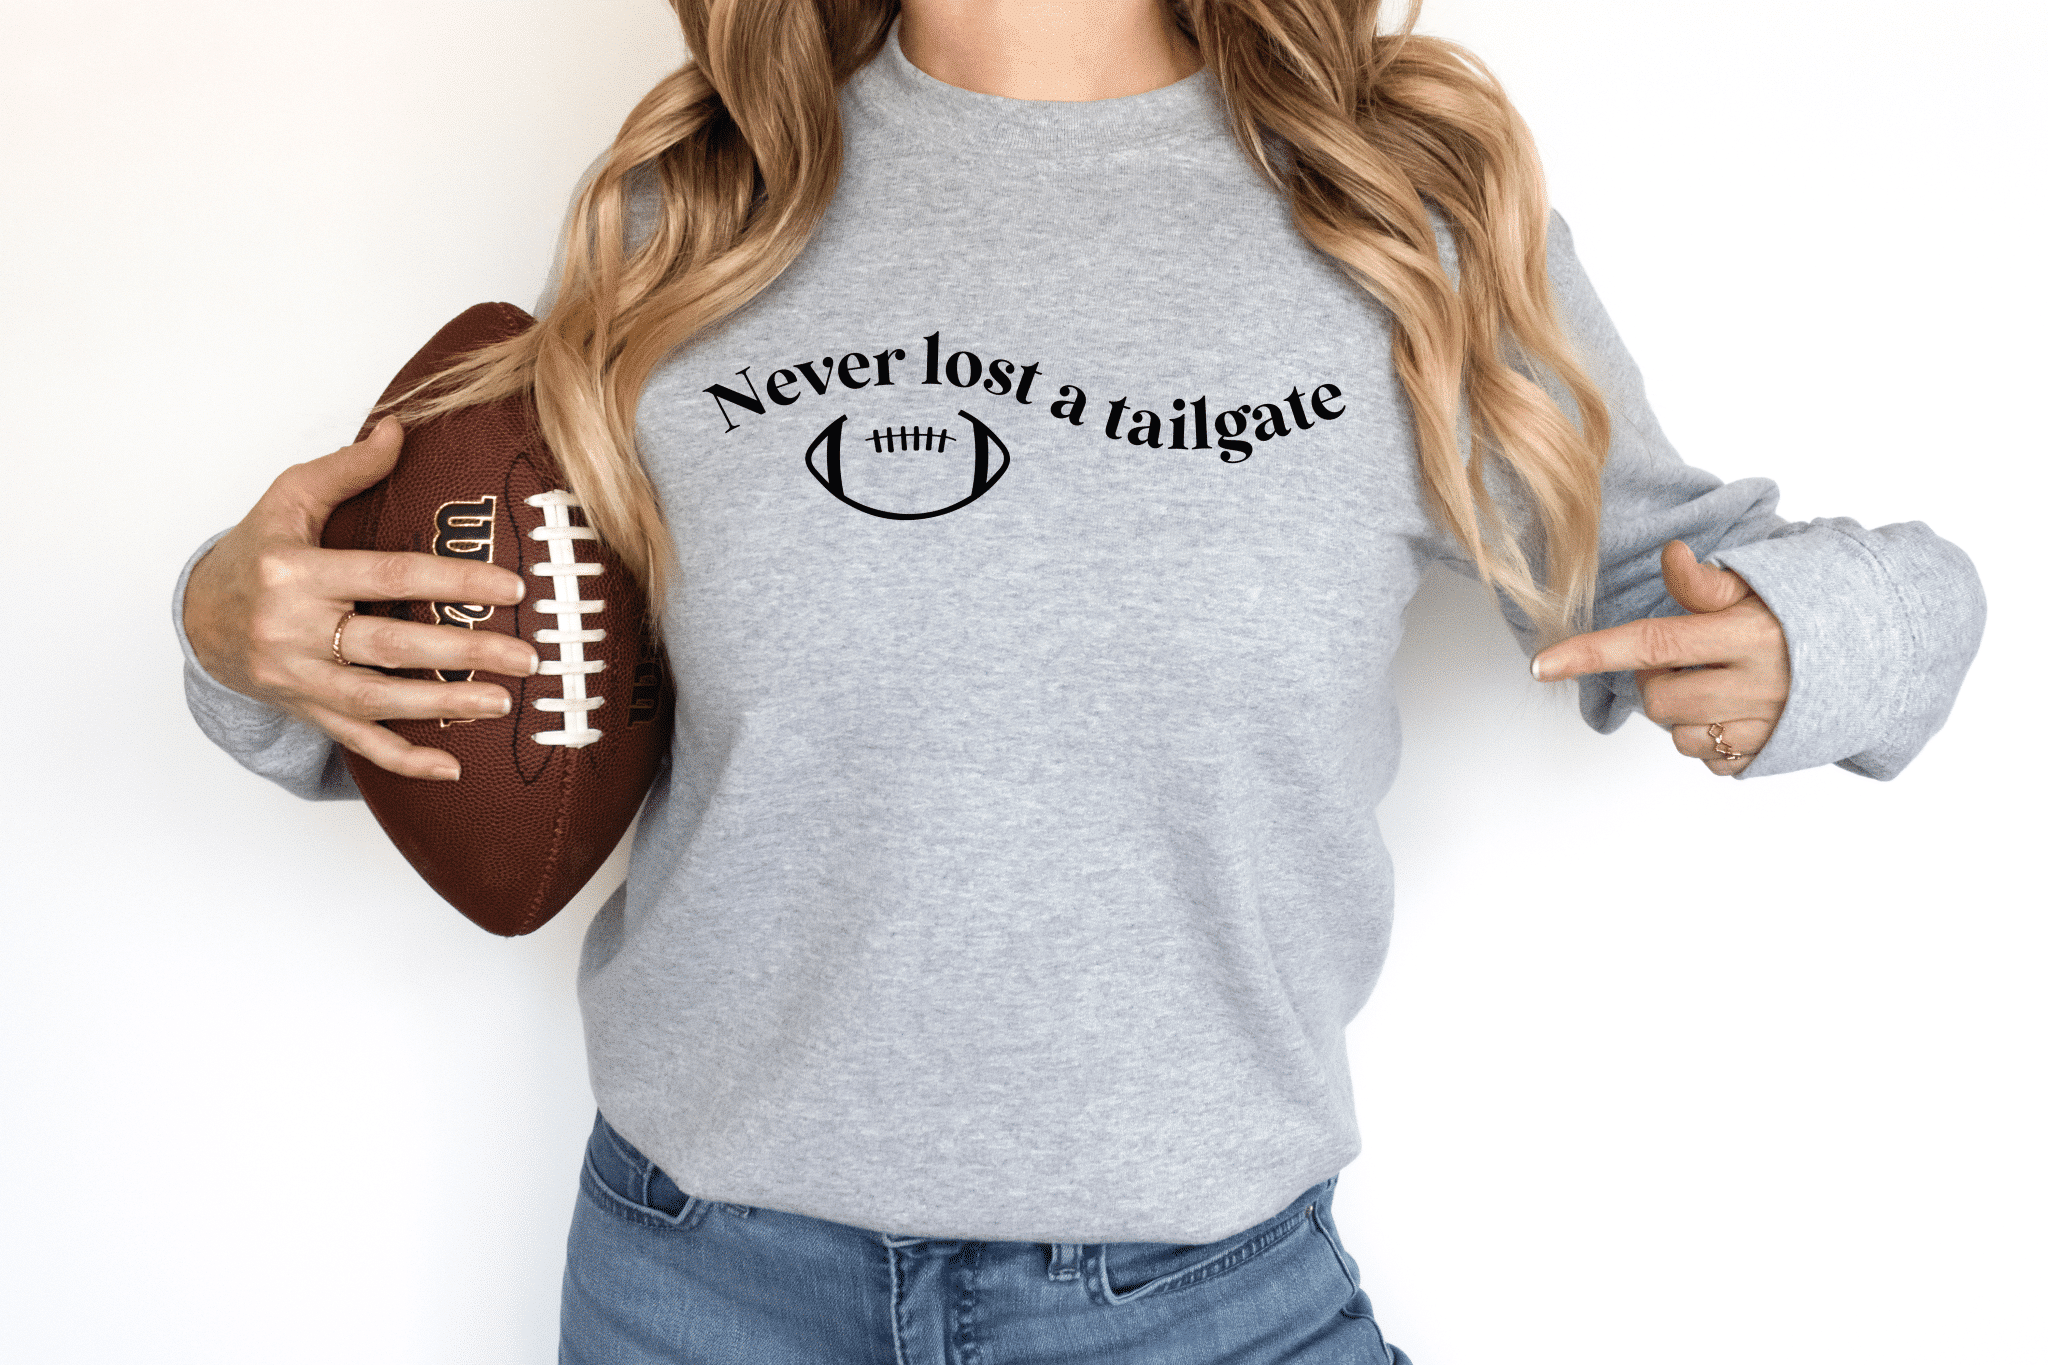 Woman holding a football wearing a grey crewneck sweatshirt that says never lost a tailgate